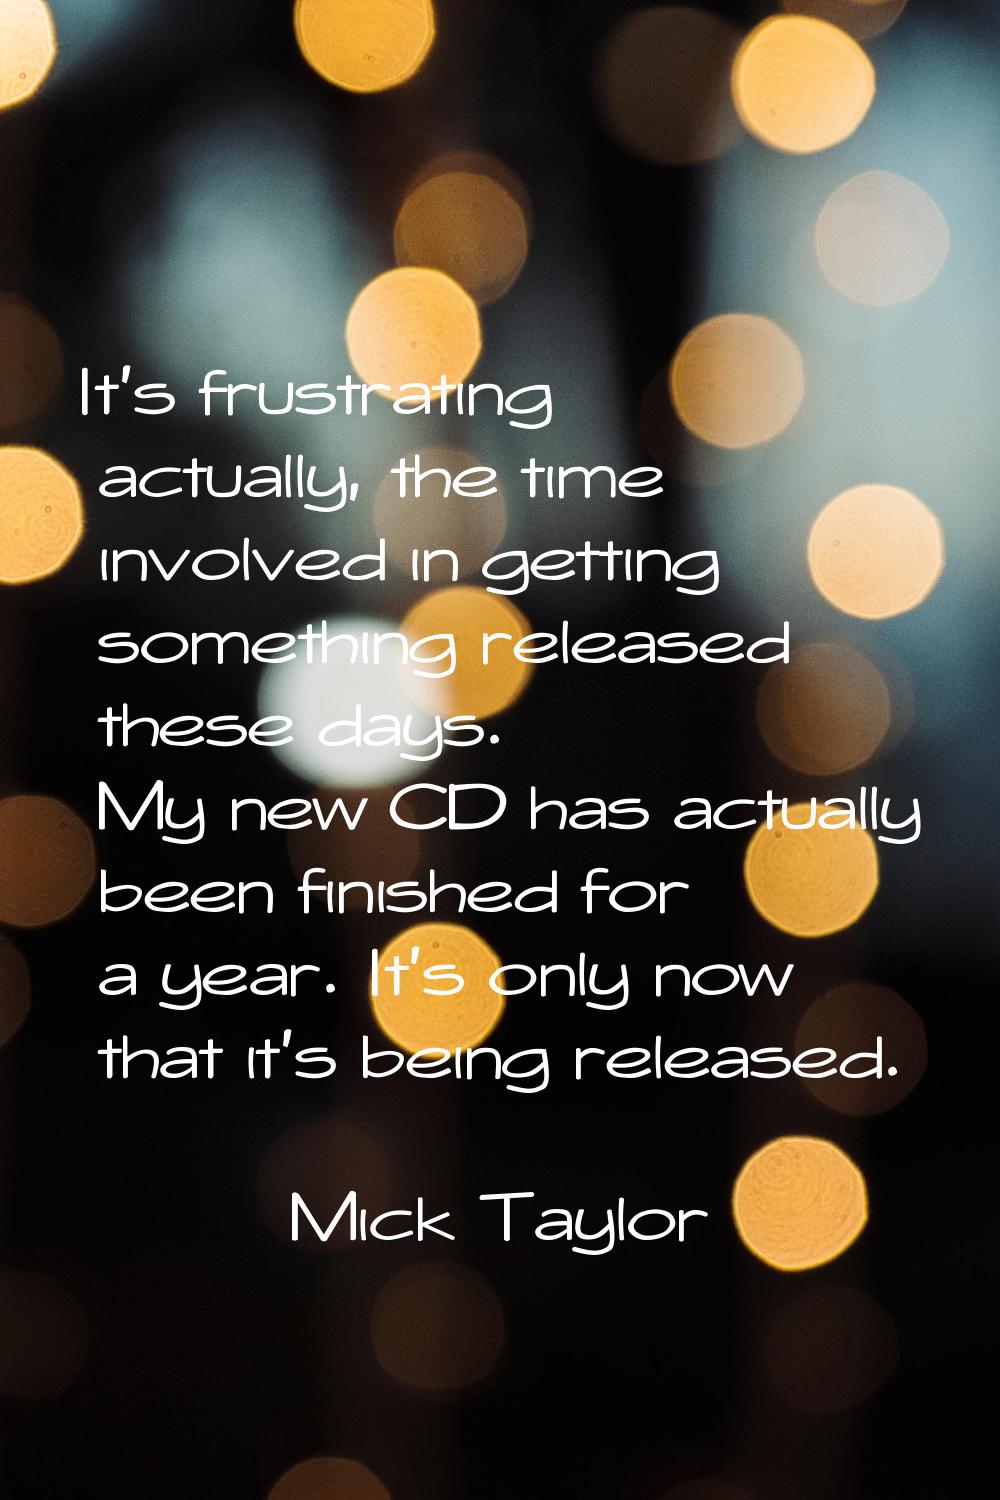 It's frustrating actually, the time involved in getting something released these days. My new CD ha